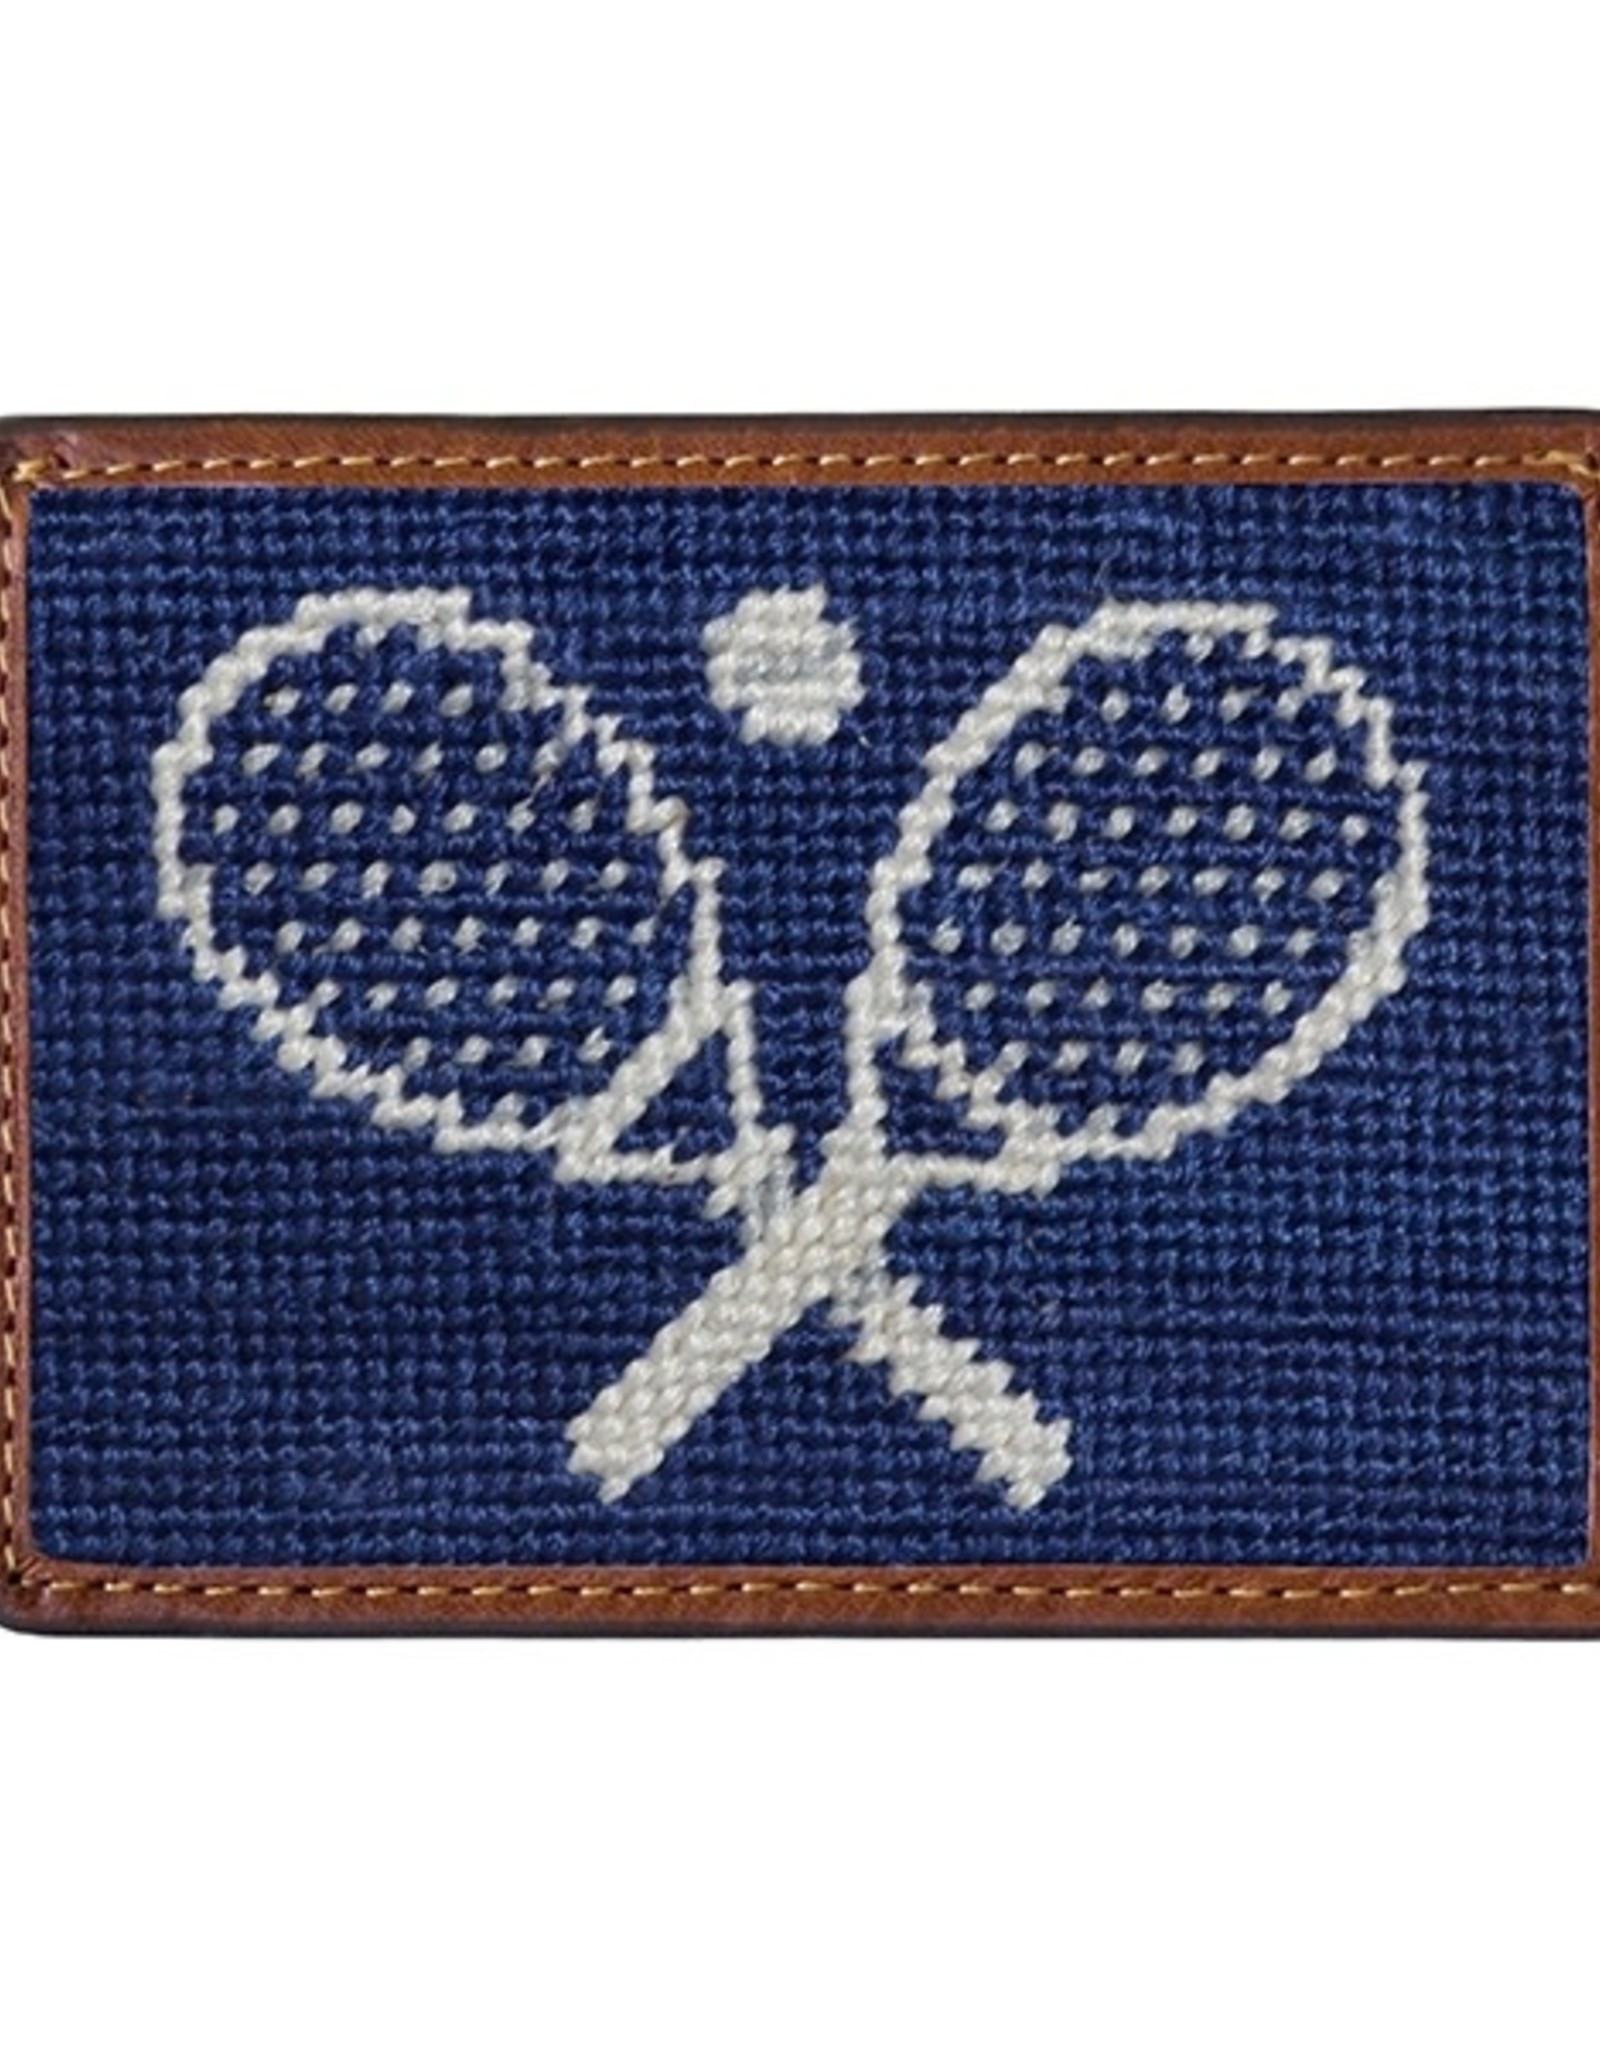 Smather's & Branson Card Wallet Crossed Racquets